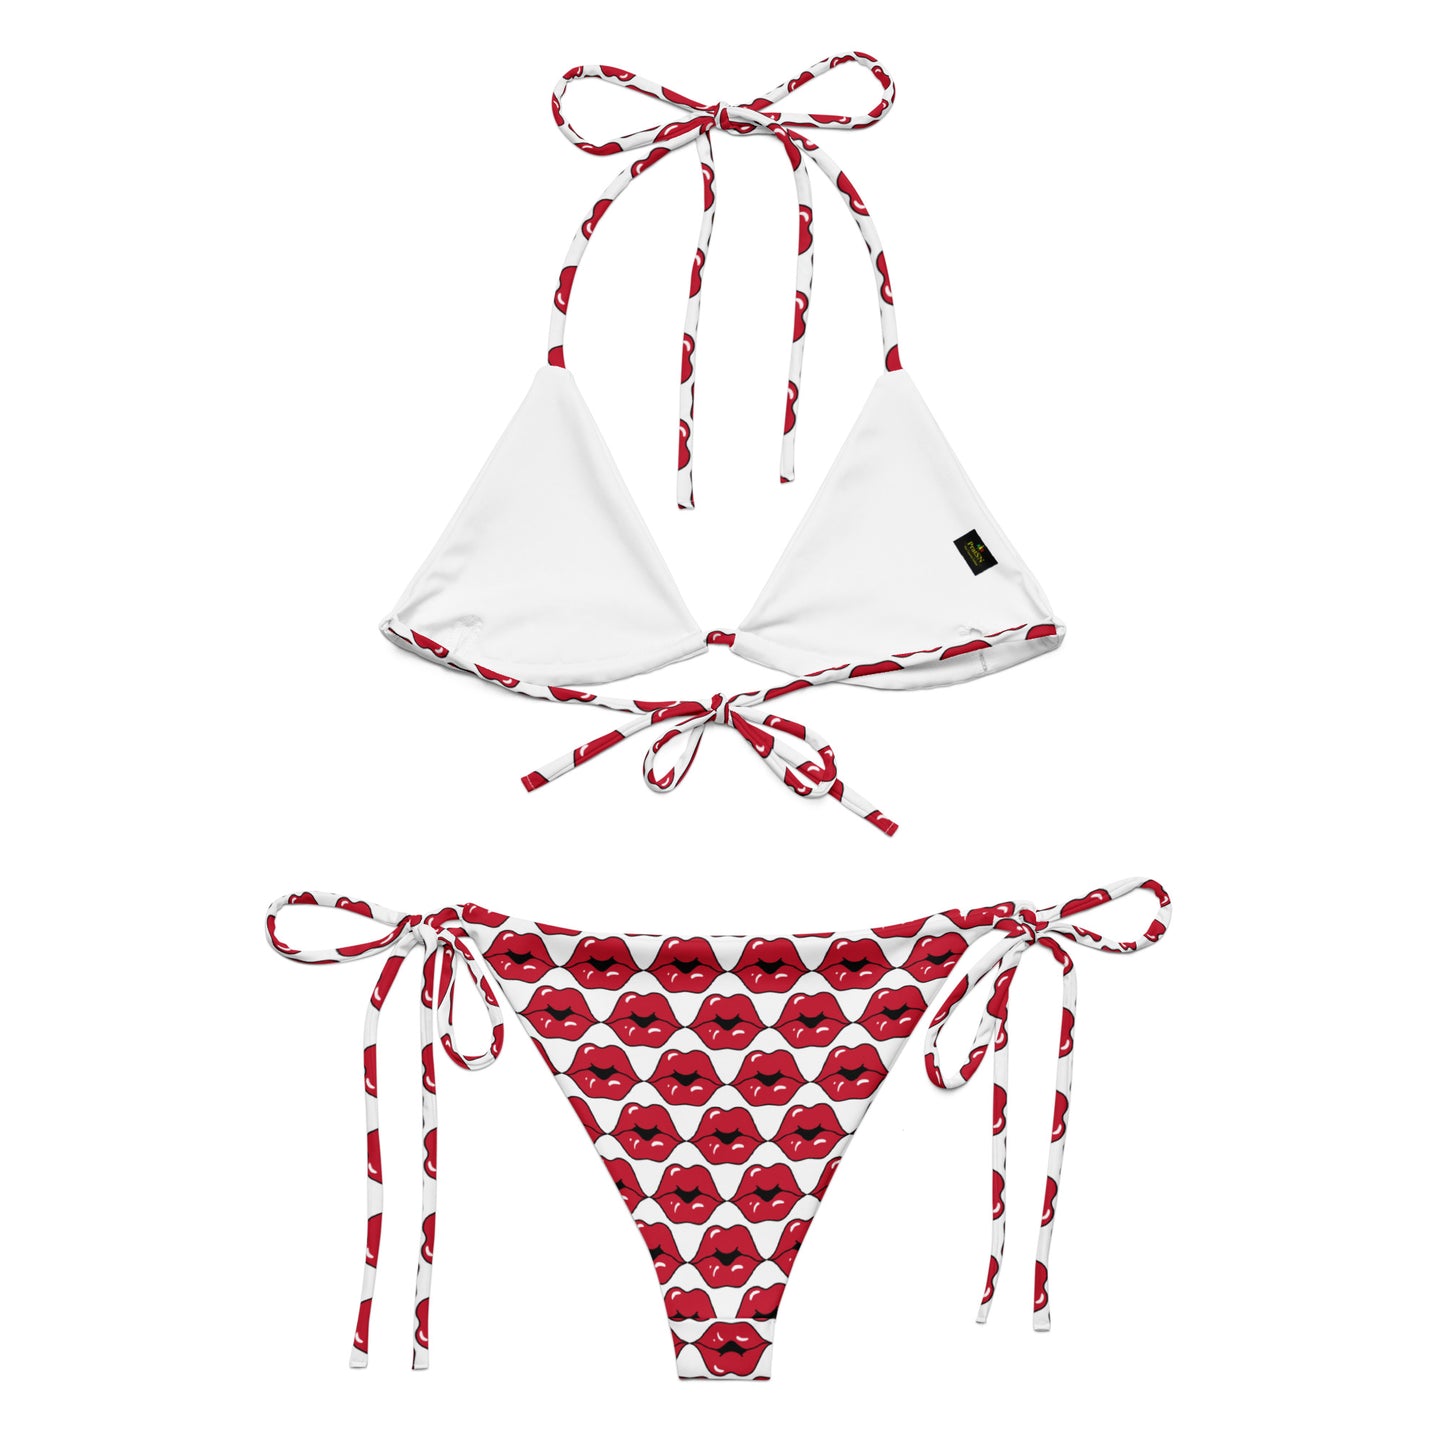 All-over print recycled string bikini, Red Lips Pattern outfit, bathing suits, Swimming Suits. Women's Swimwear